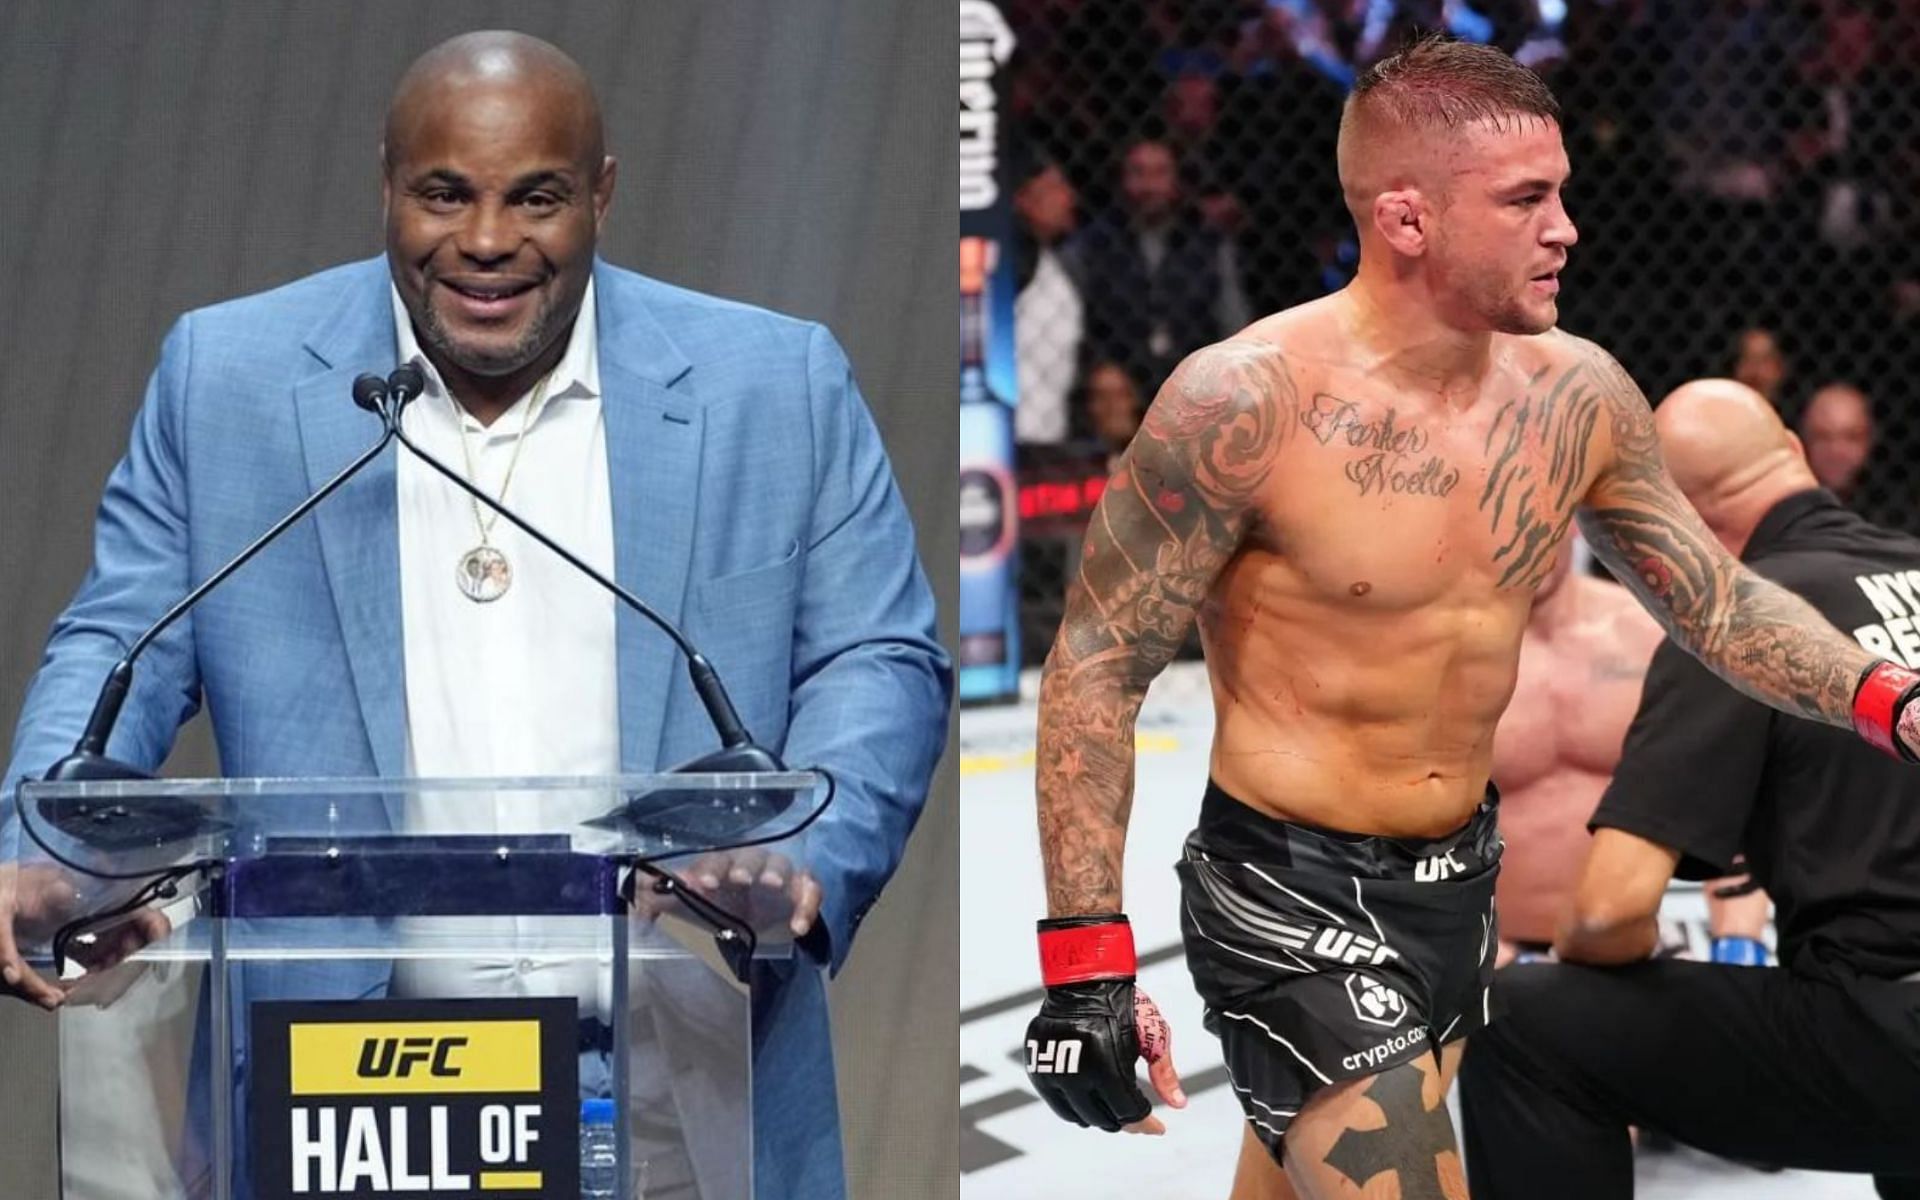 Daniel Cormier (left) does not approve of Dustin Poirier (right) addressing his potential retirement [Photo Courtesy @dc_mma and @dustinpoirier on Instagram]